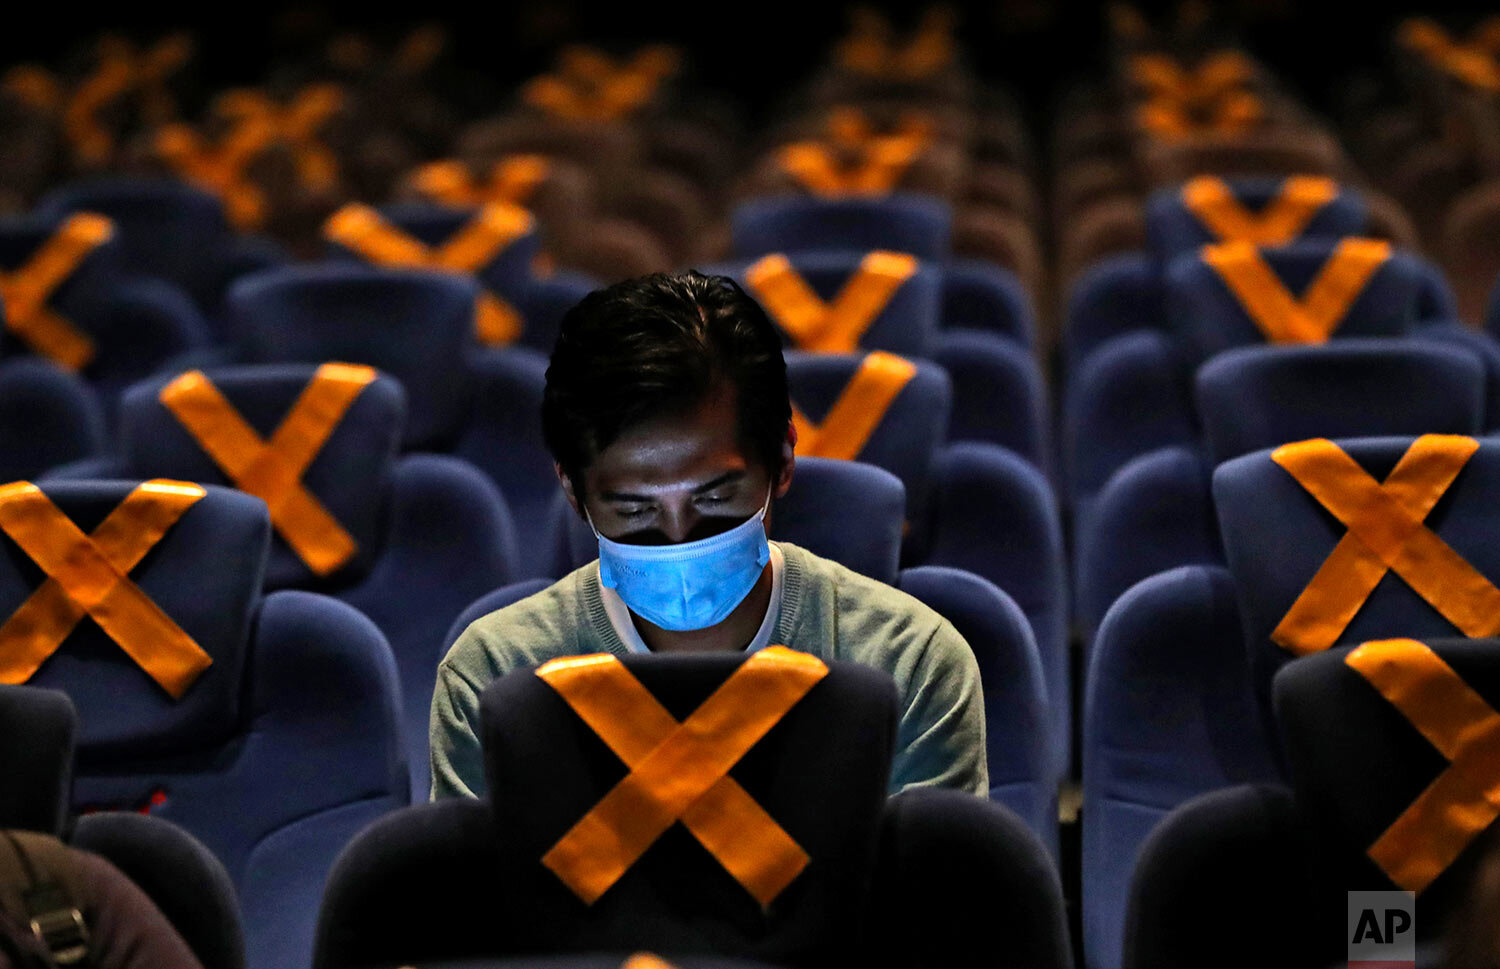  A man checks his mobile phone as he sits amid physical distancing markers prior to the start of a movie at CGV Cinemas theater in Jakarta, Indonesia, Friday, Oct. 23, 2020.  (AP Photo/Tatan Syuflana) 